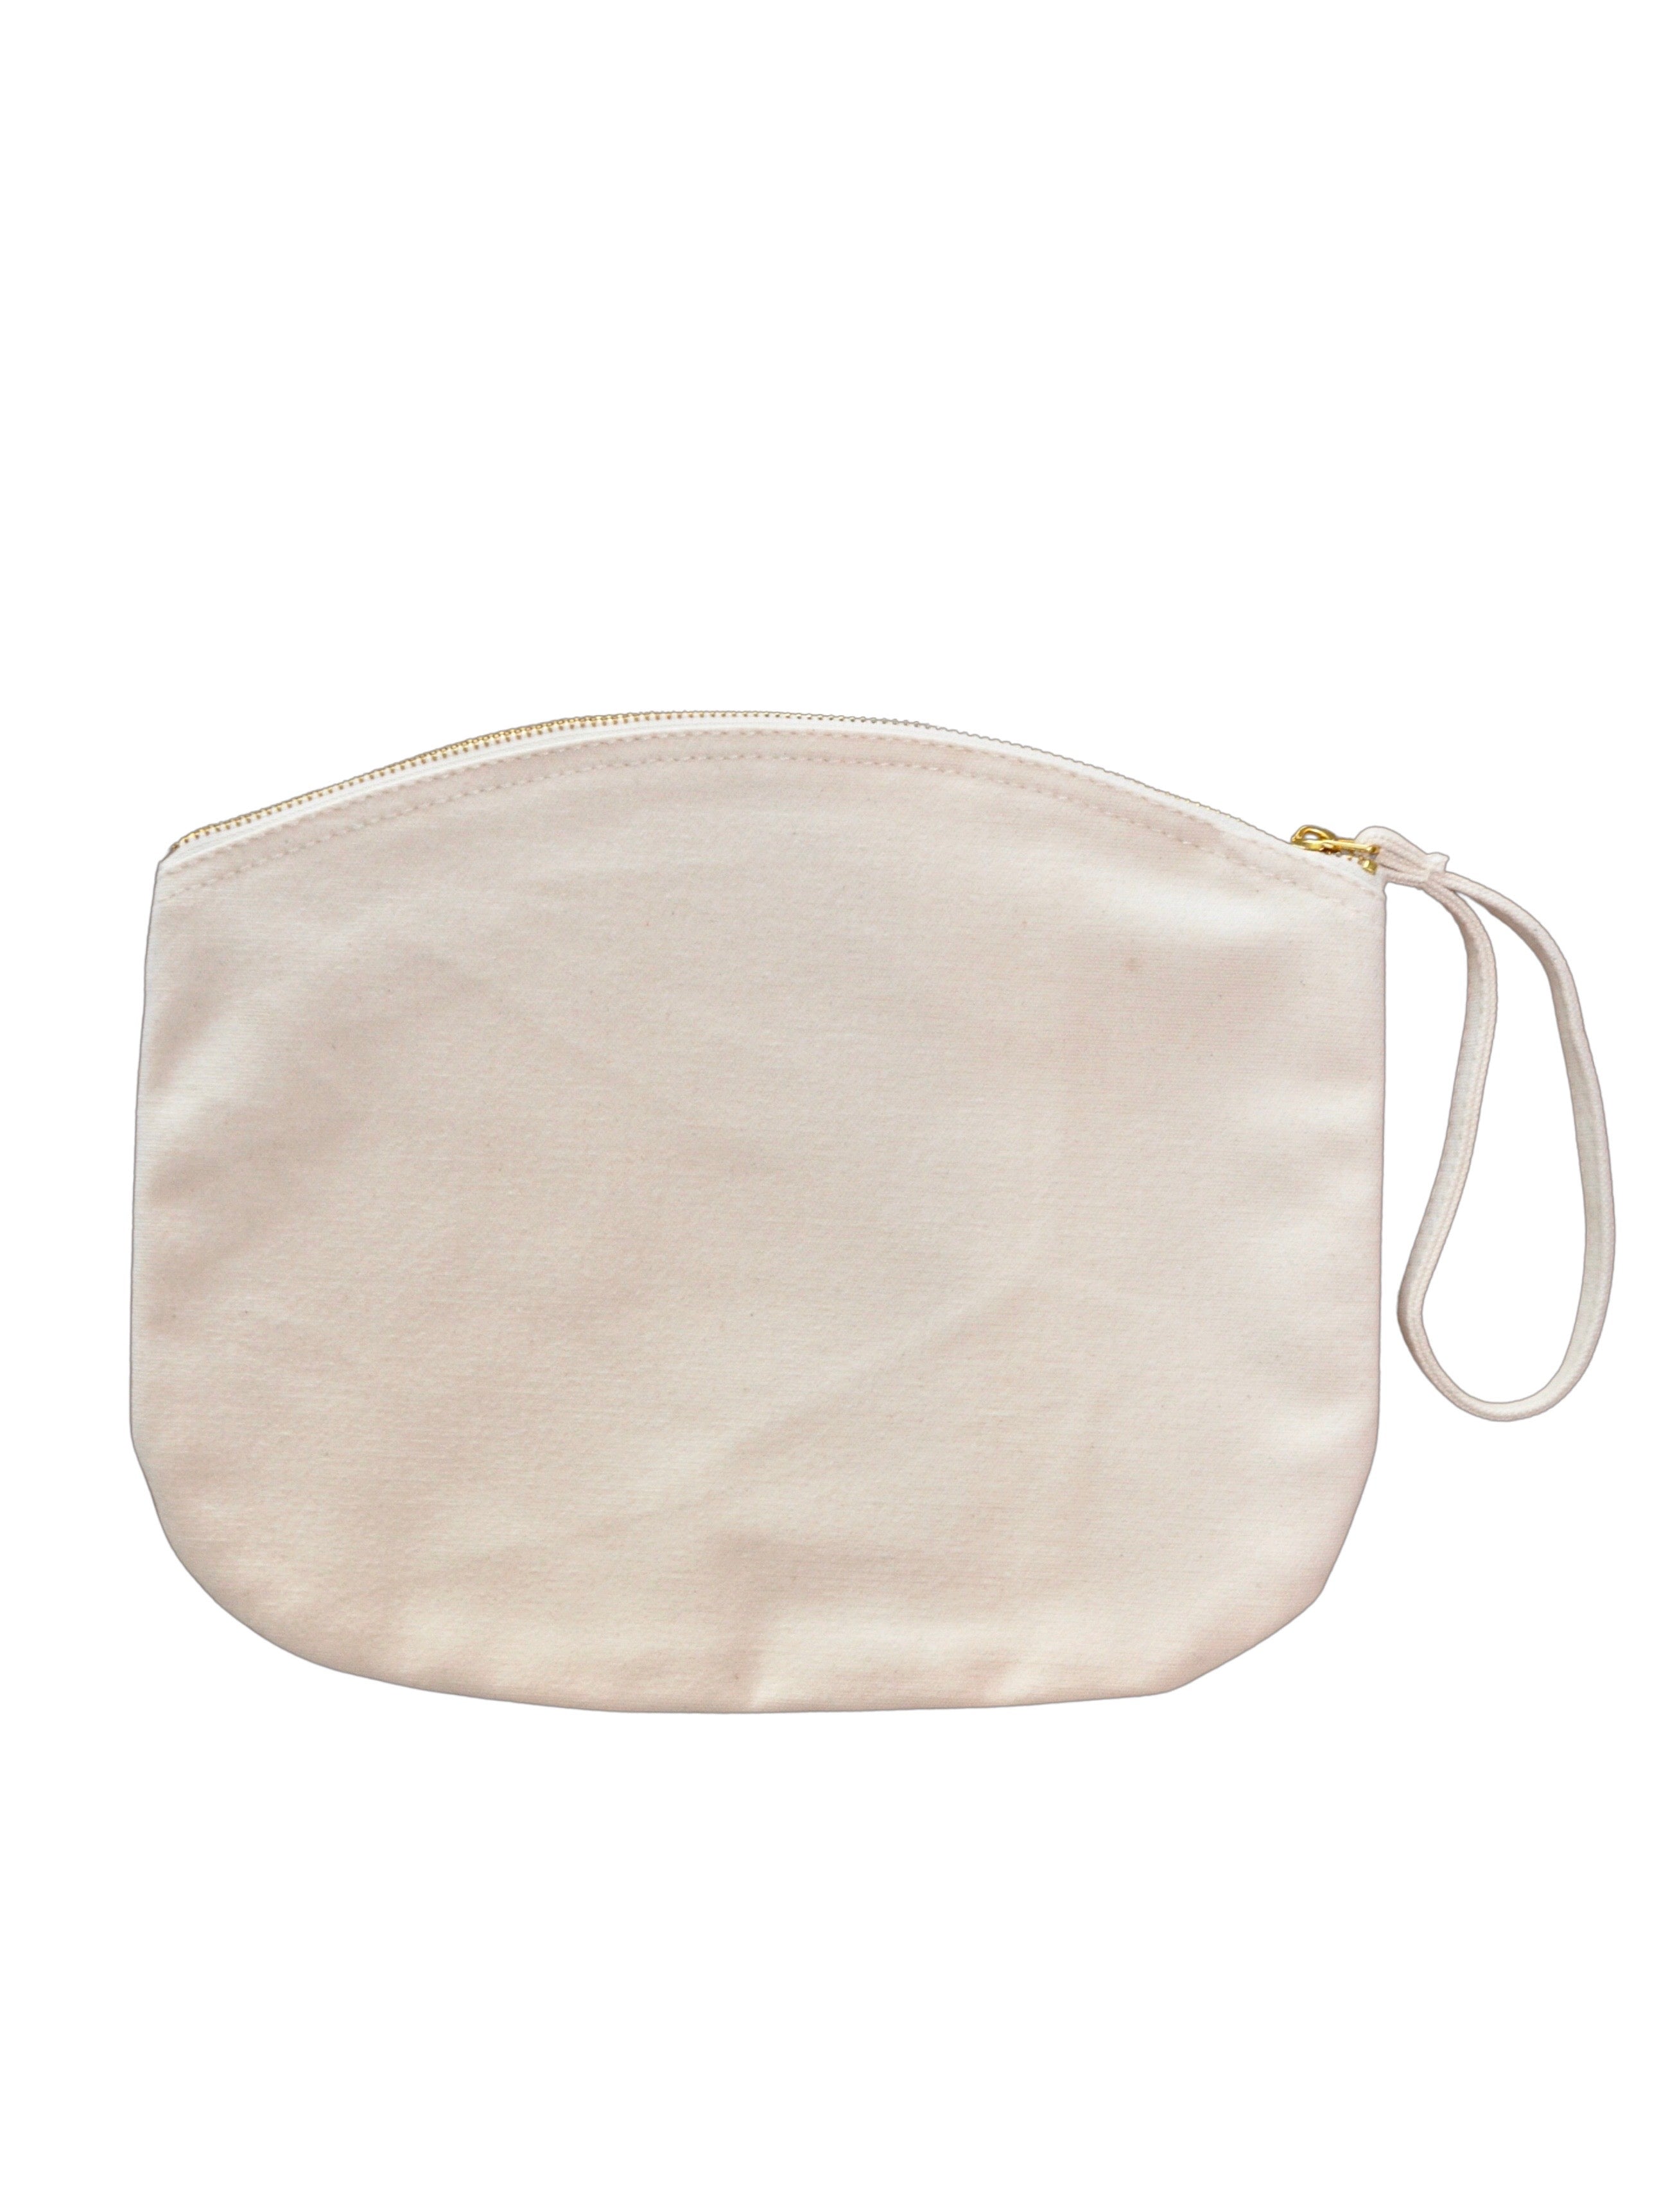 BY11 Organic Cotton Essential Pouch - Natural